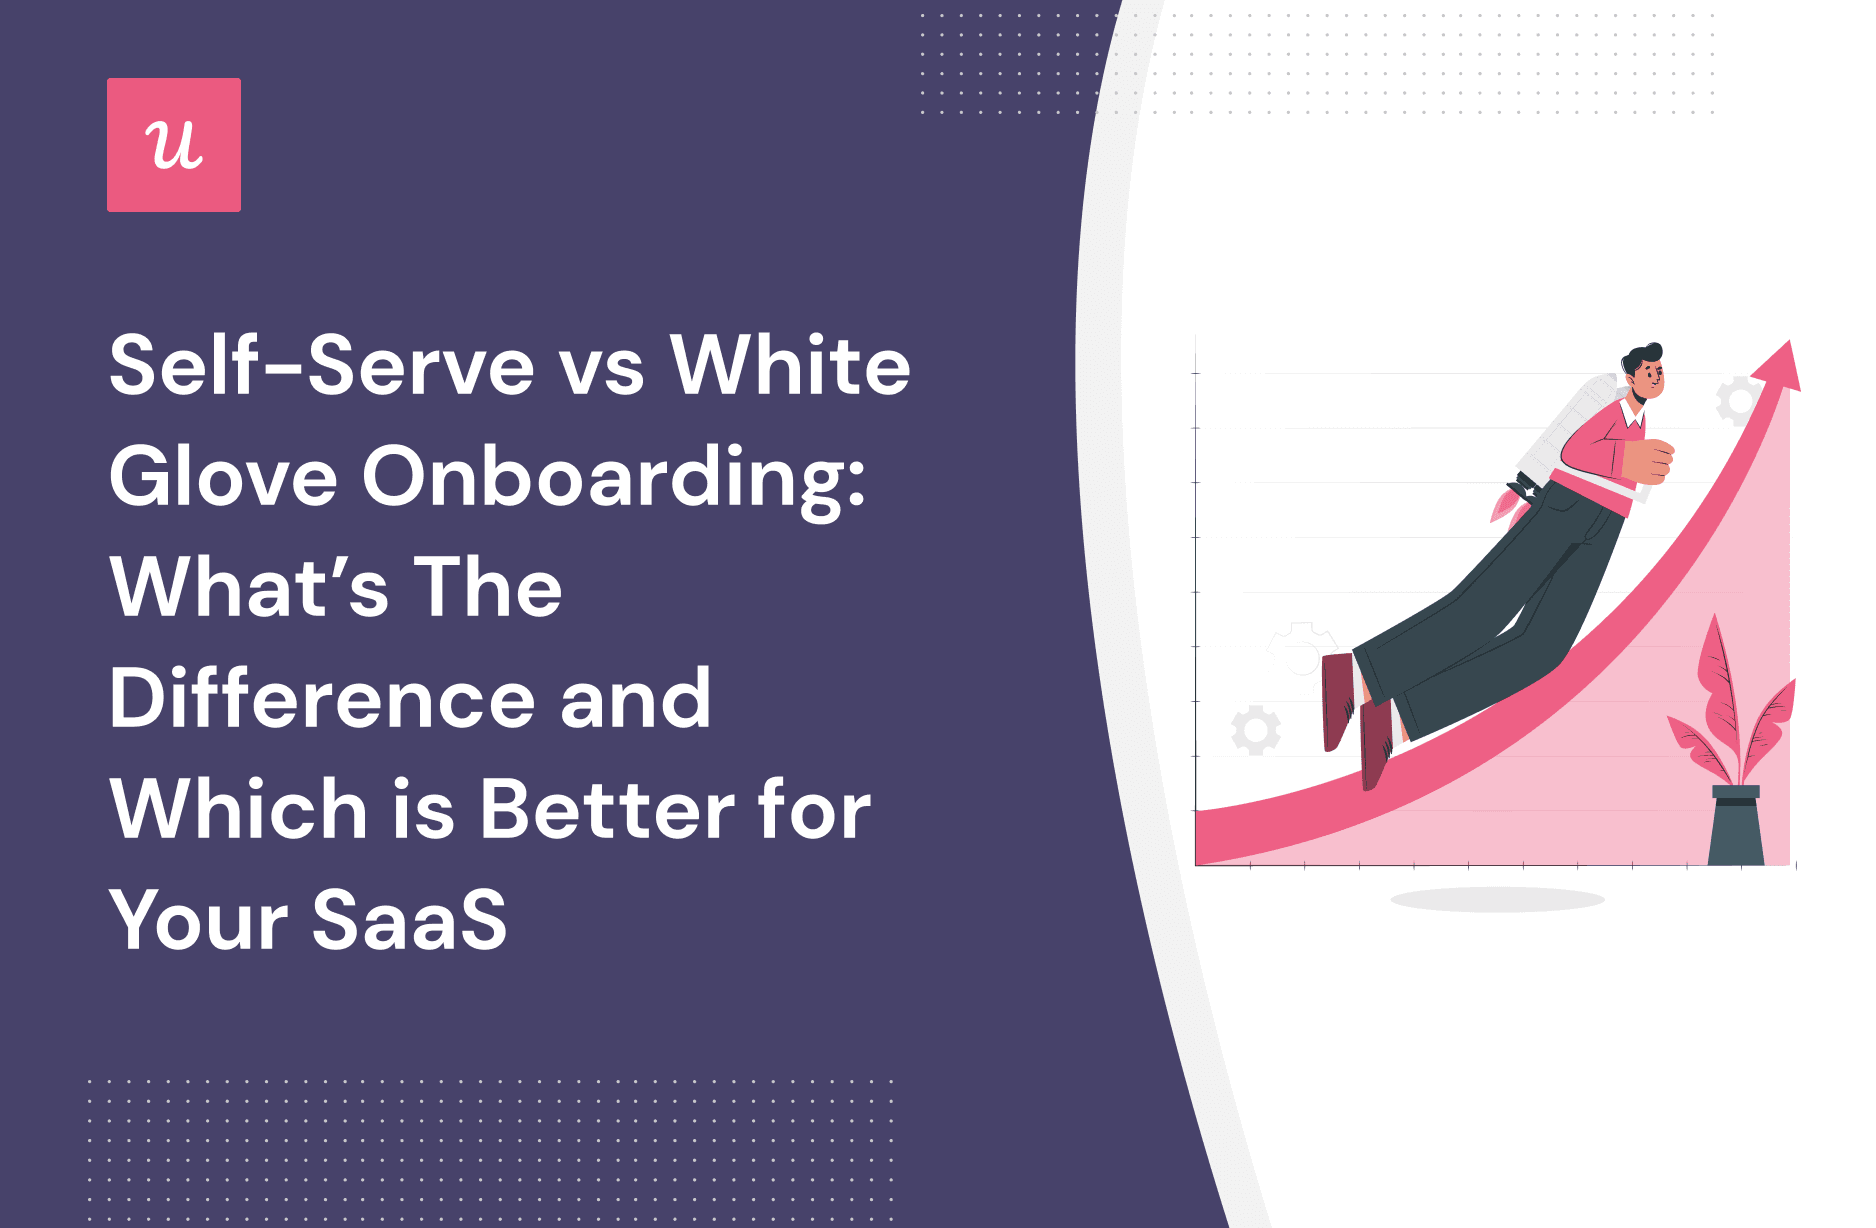 Self-Serve vs. White Glove Onboarding: What’s The Difference and Which is Better For Your SaaS cover